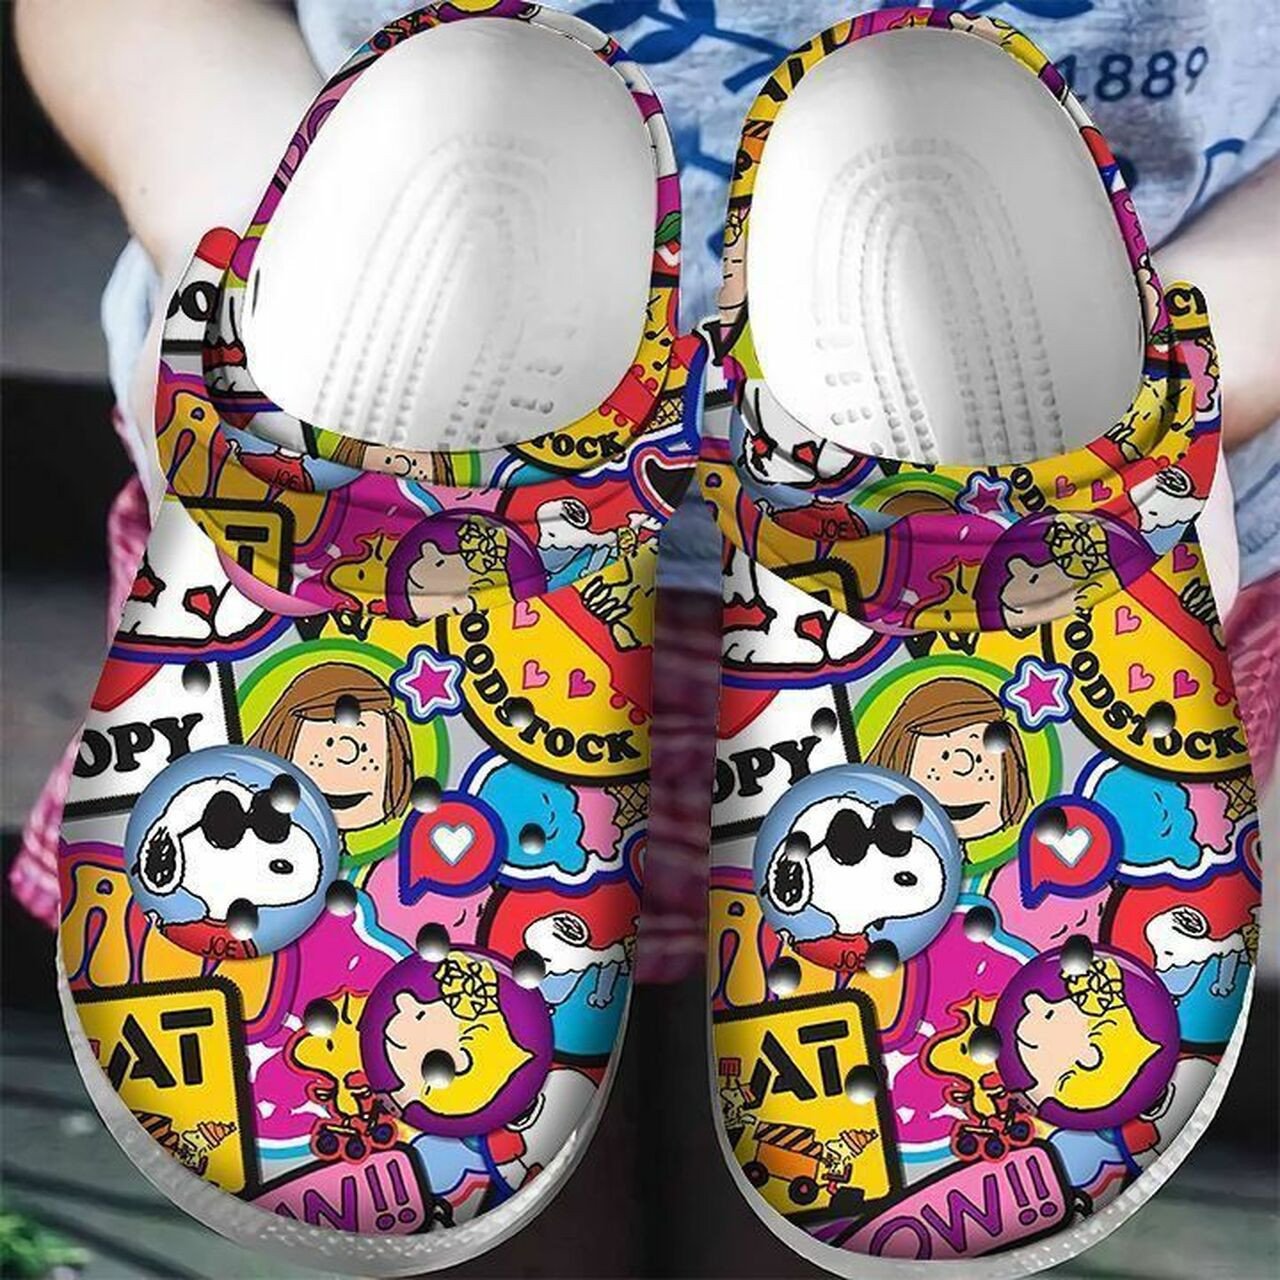 Snoopy Peanuts Crocss Crocband Clog Comfortable Water Shoes In Multi Color